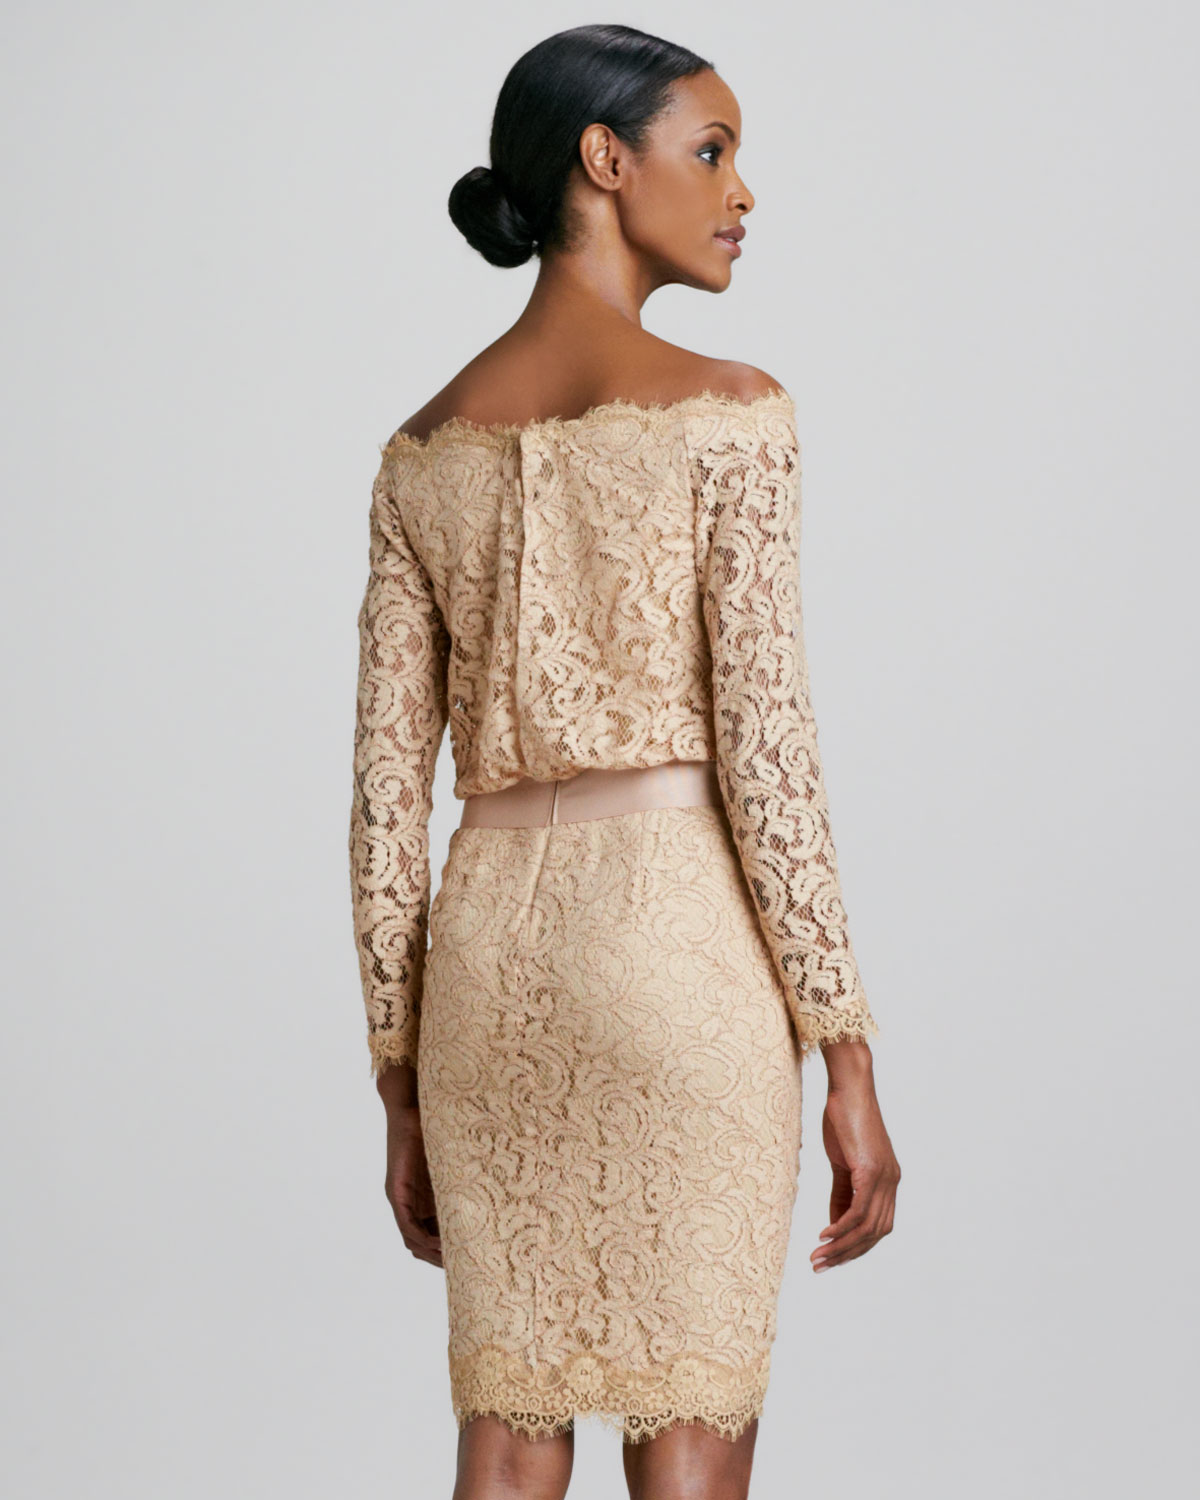 Tadashi shoji Off-The-Shoulder Lace Cocktail Dress in Natural - Lyst